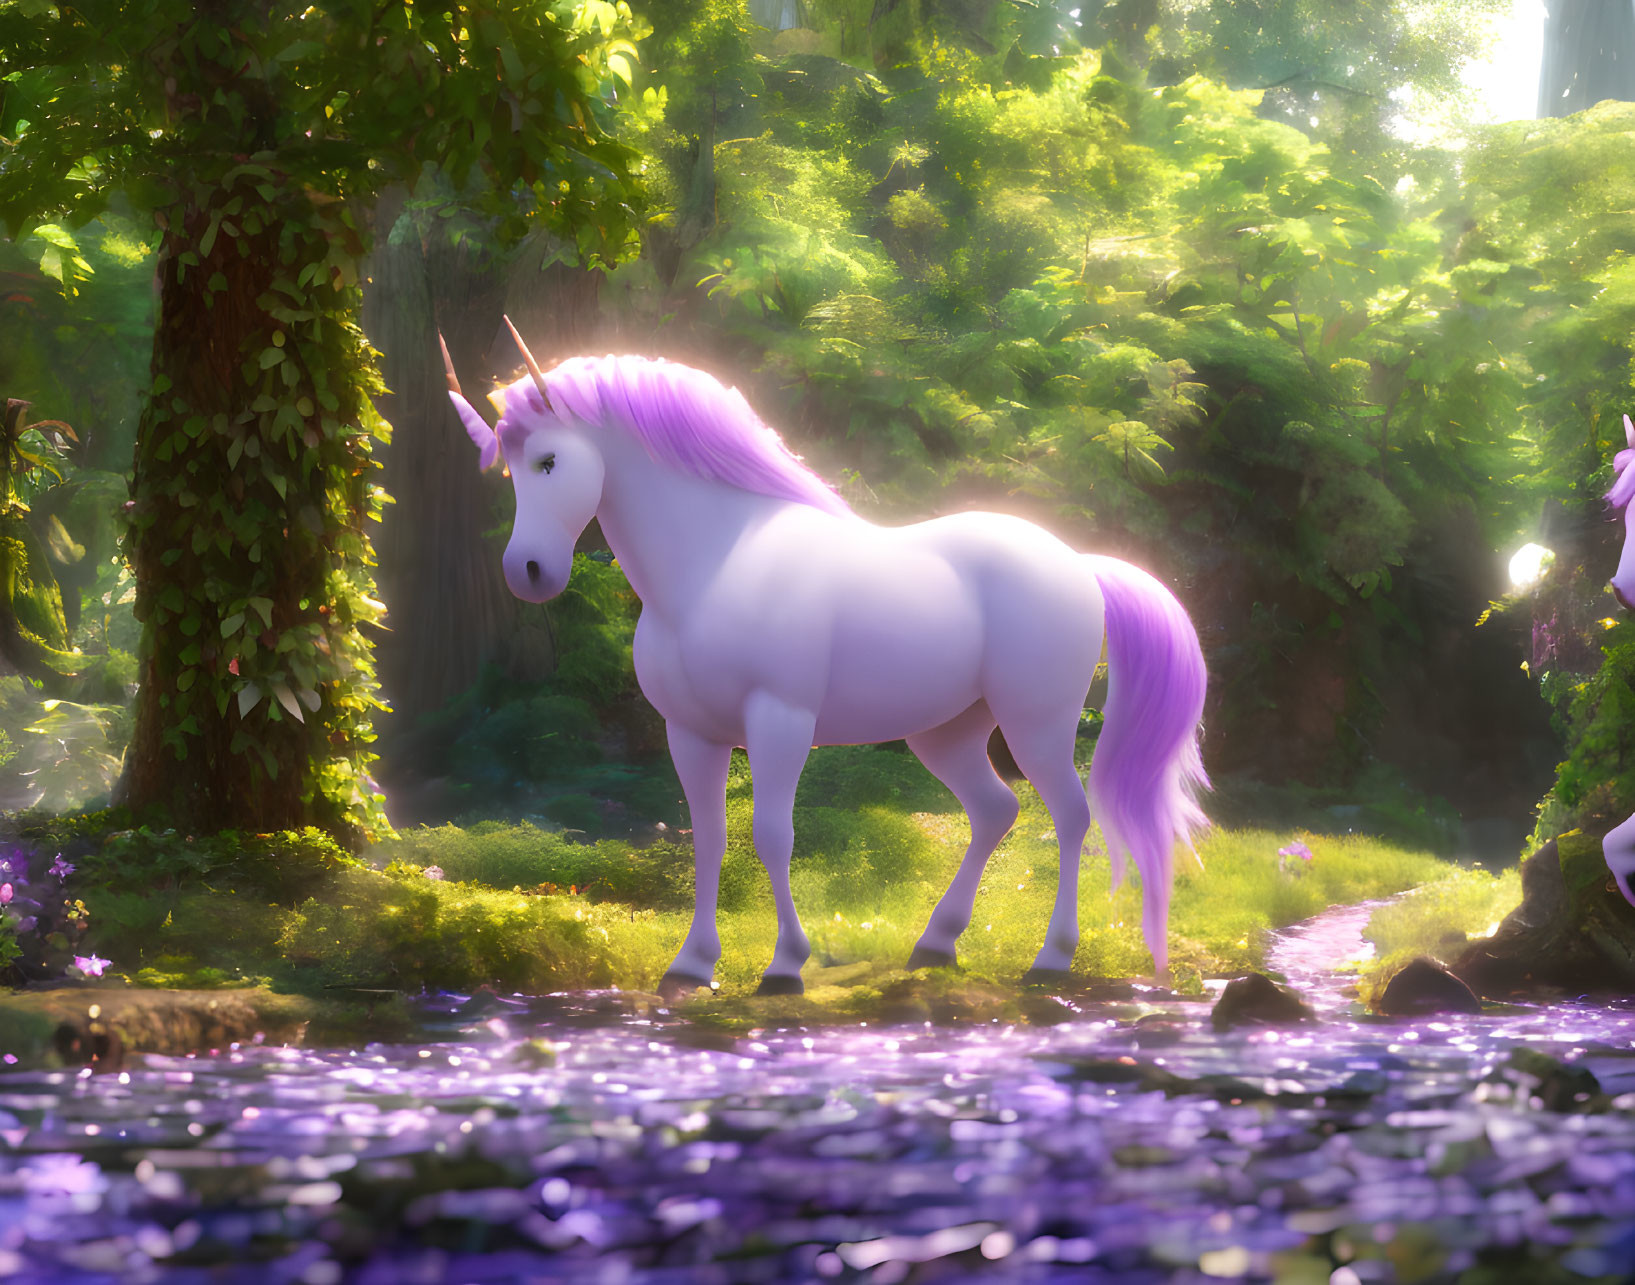 Majestic unicorn with purple mane in sunlit forest by stream